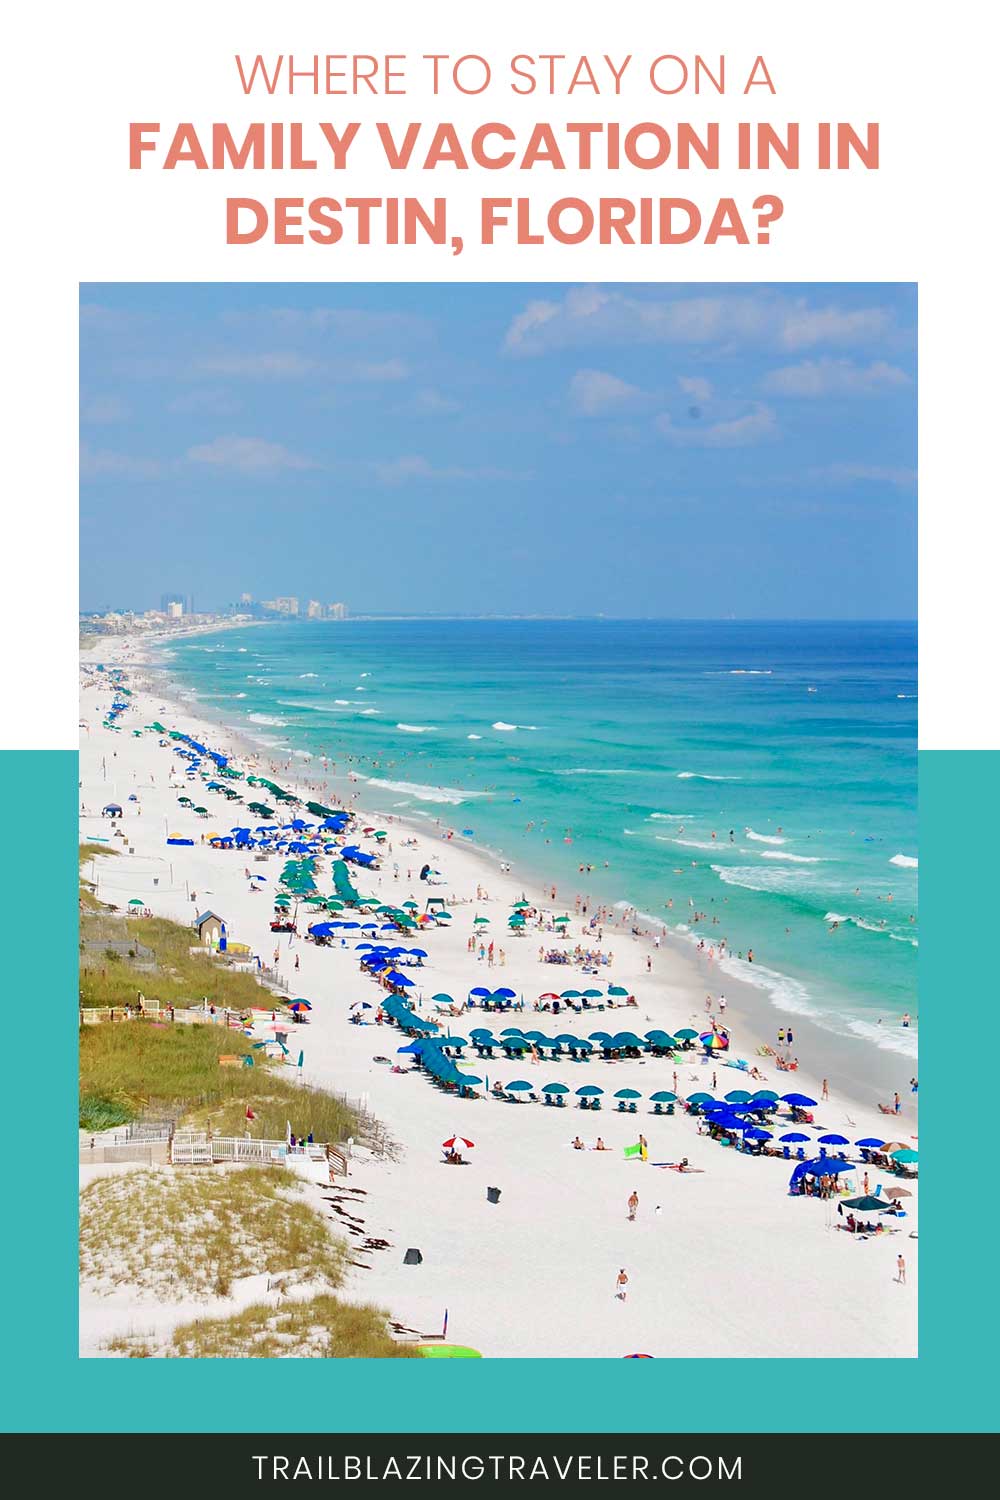 A beach with umbrellas and people - Where To Stay On A Family Vacation in In Destin, Florida?